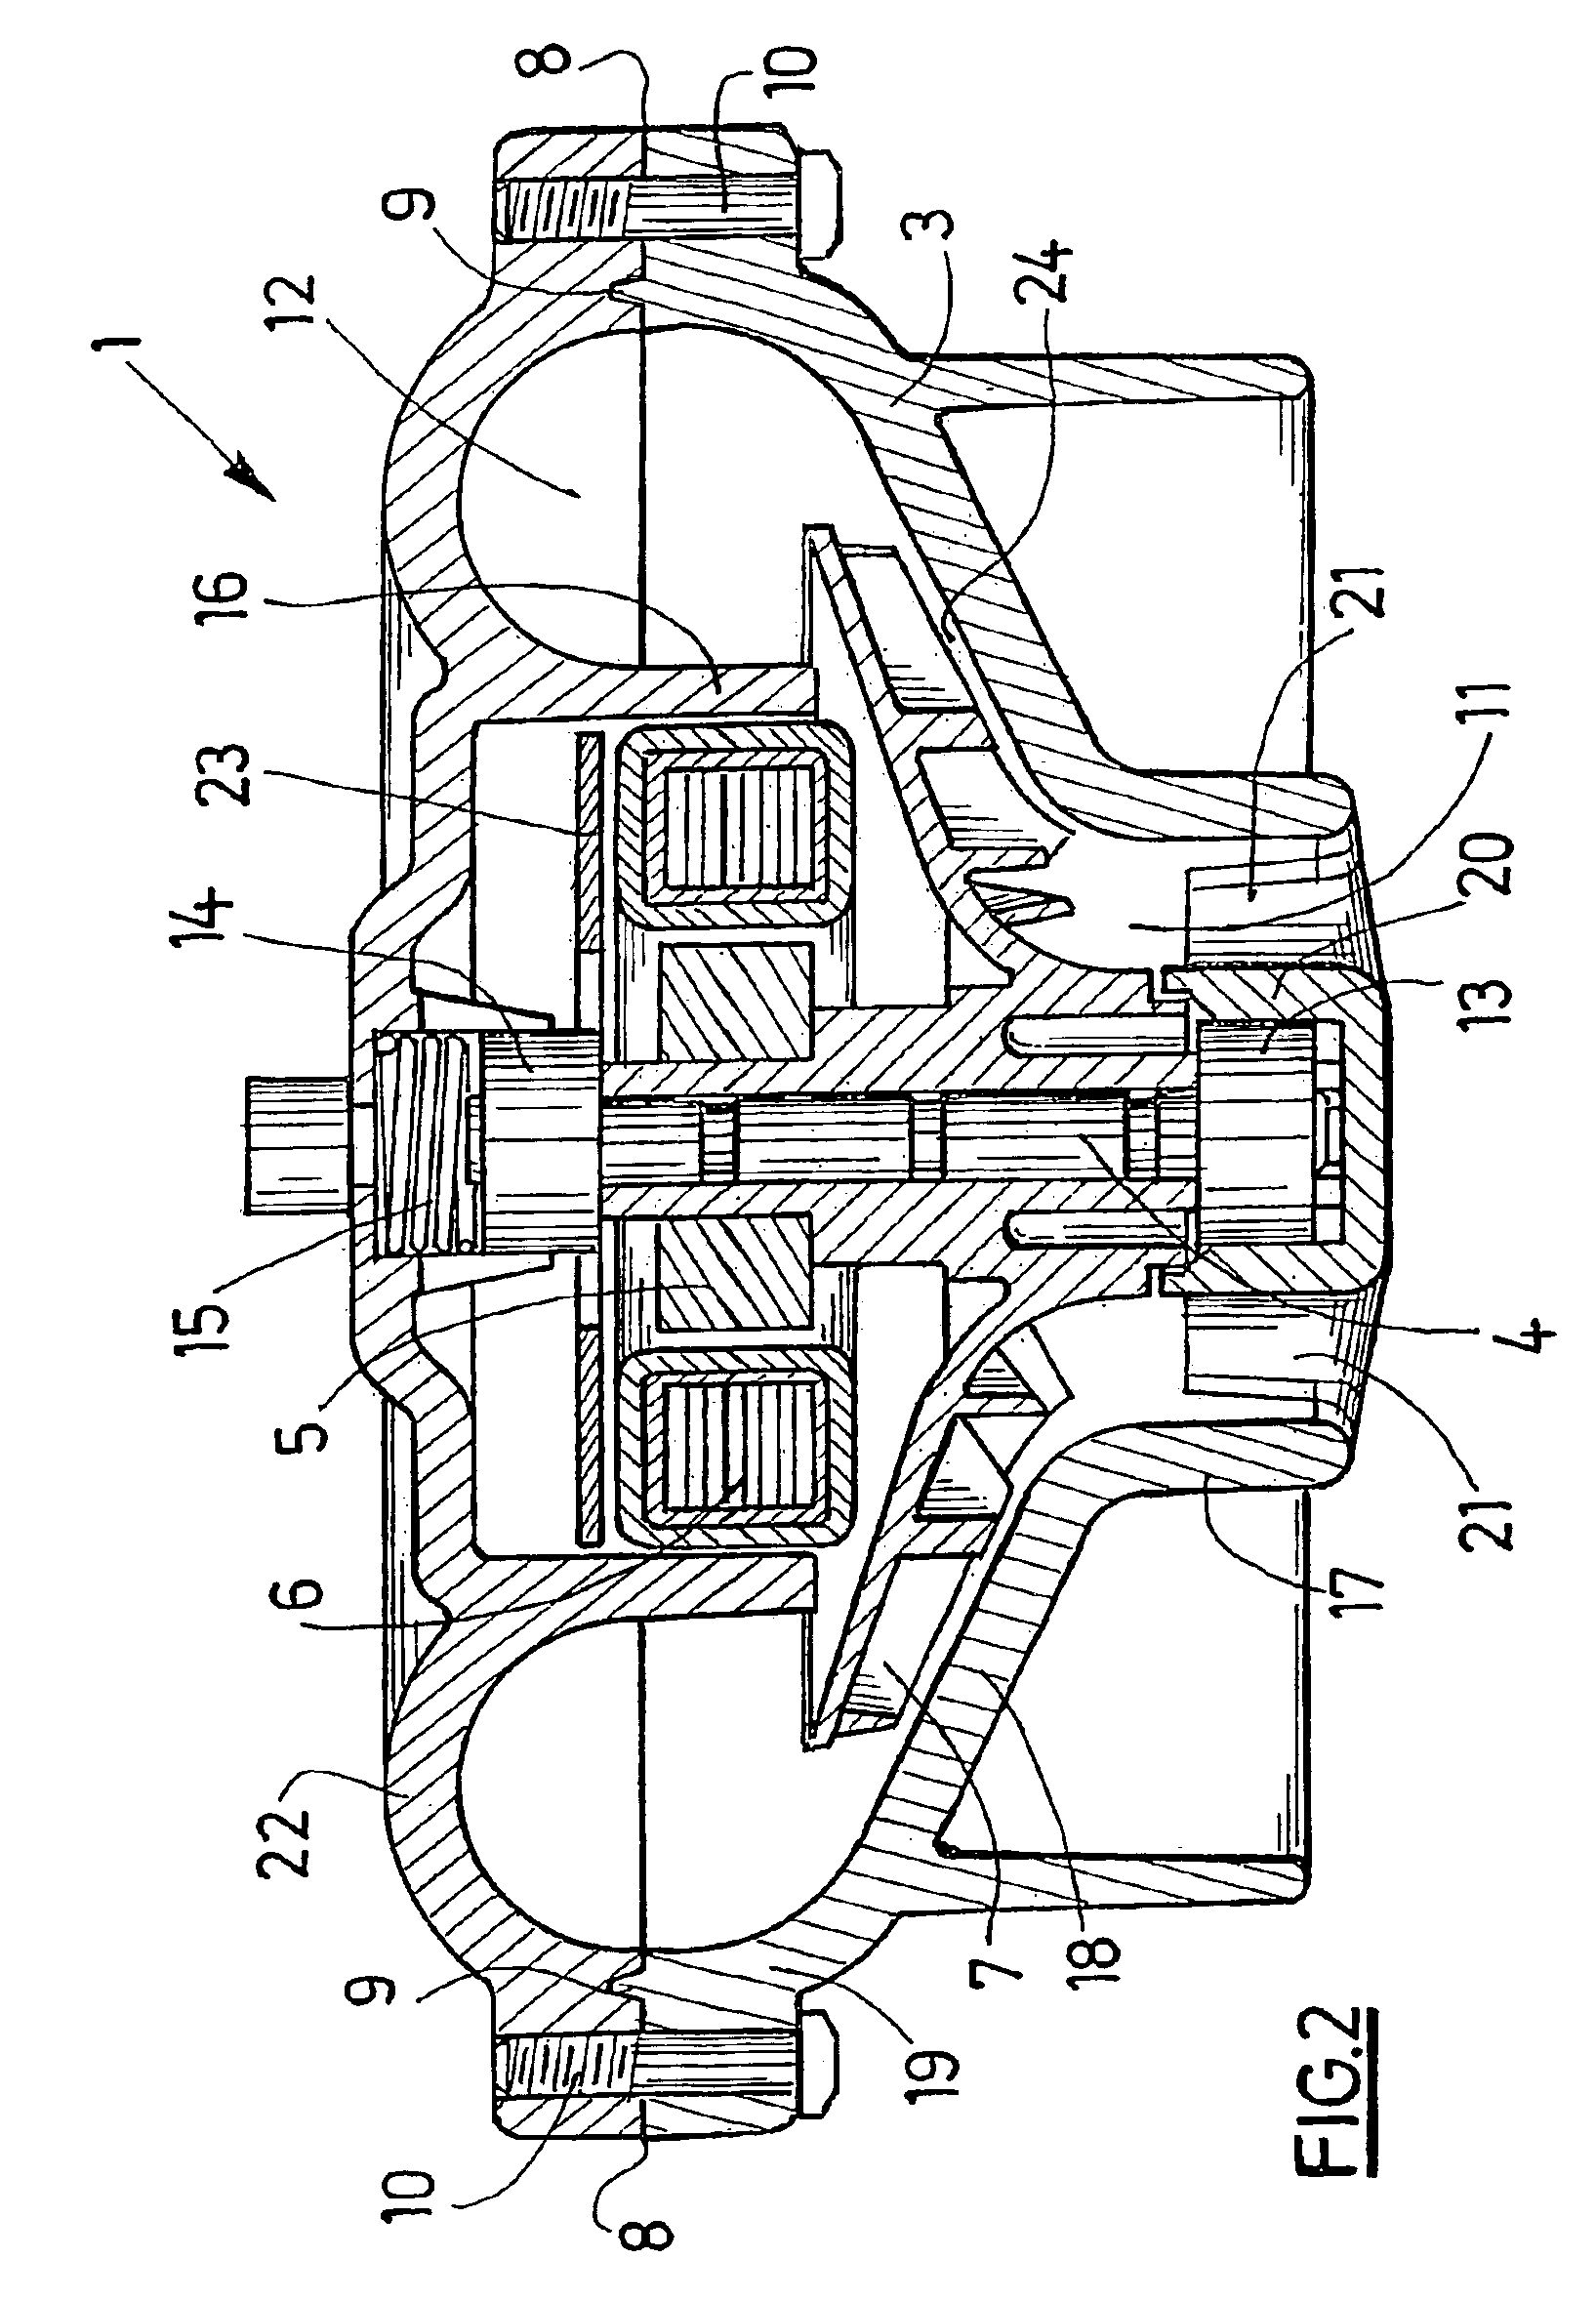 Centrifugal turbine for breathing-aid devices